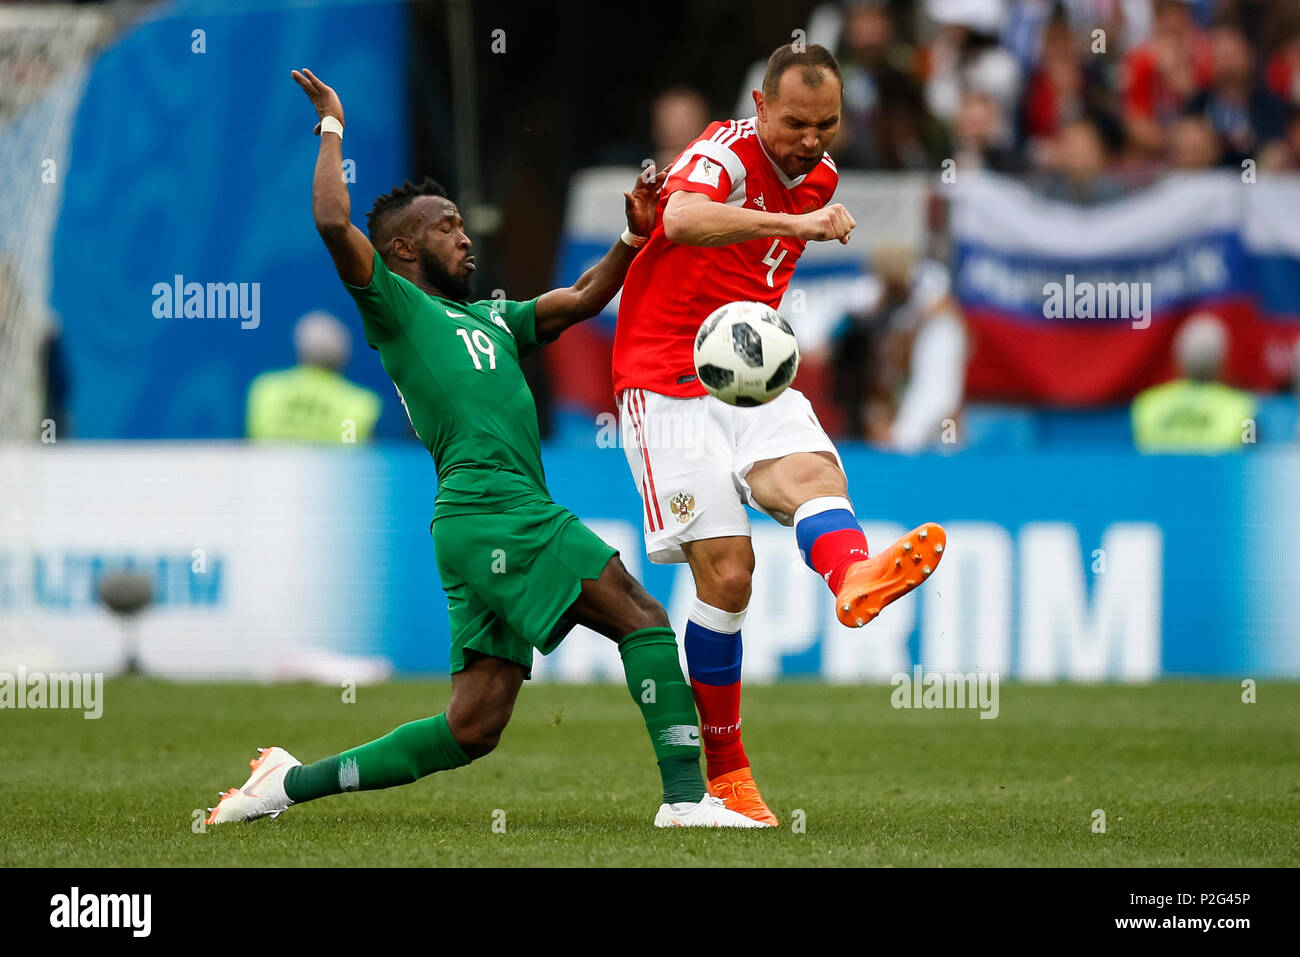 Moscow, Russia. 14th June 2018. Fahad Al-Muwallad of Saudi Arabia and Sergey Ignashevich of Russia during the 2018 FIFA World Cup Group A match between Russia and Saudi Arabia at Luzhniki Stadium on June 14th 2018 in Moscow, Russia. Credit: PHC Images/Alamy Live News Stock Photo